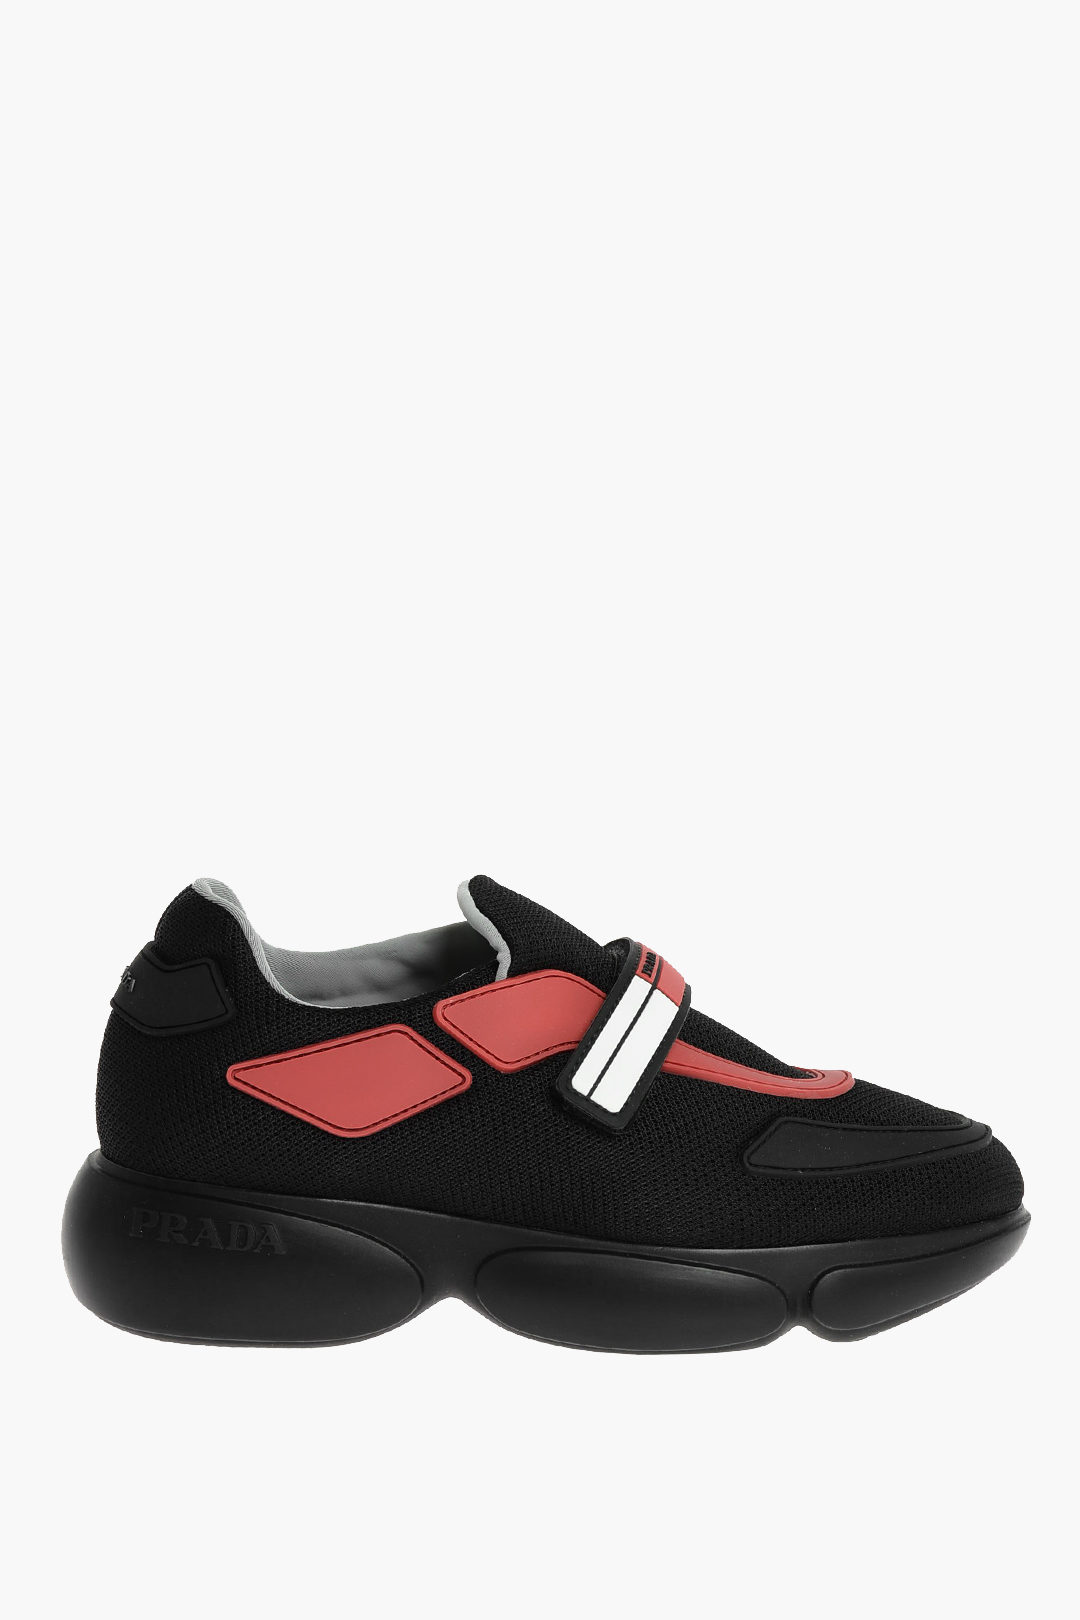 Prada CLOUDBUST Sneakers with Rubber Details and Velcro Closure women -  Glamood Outlet